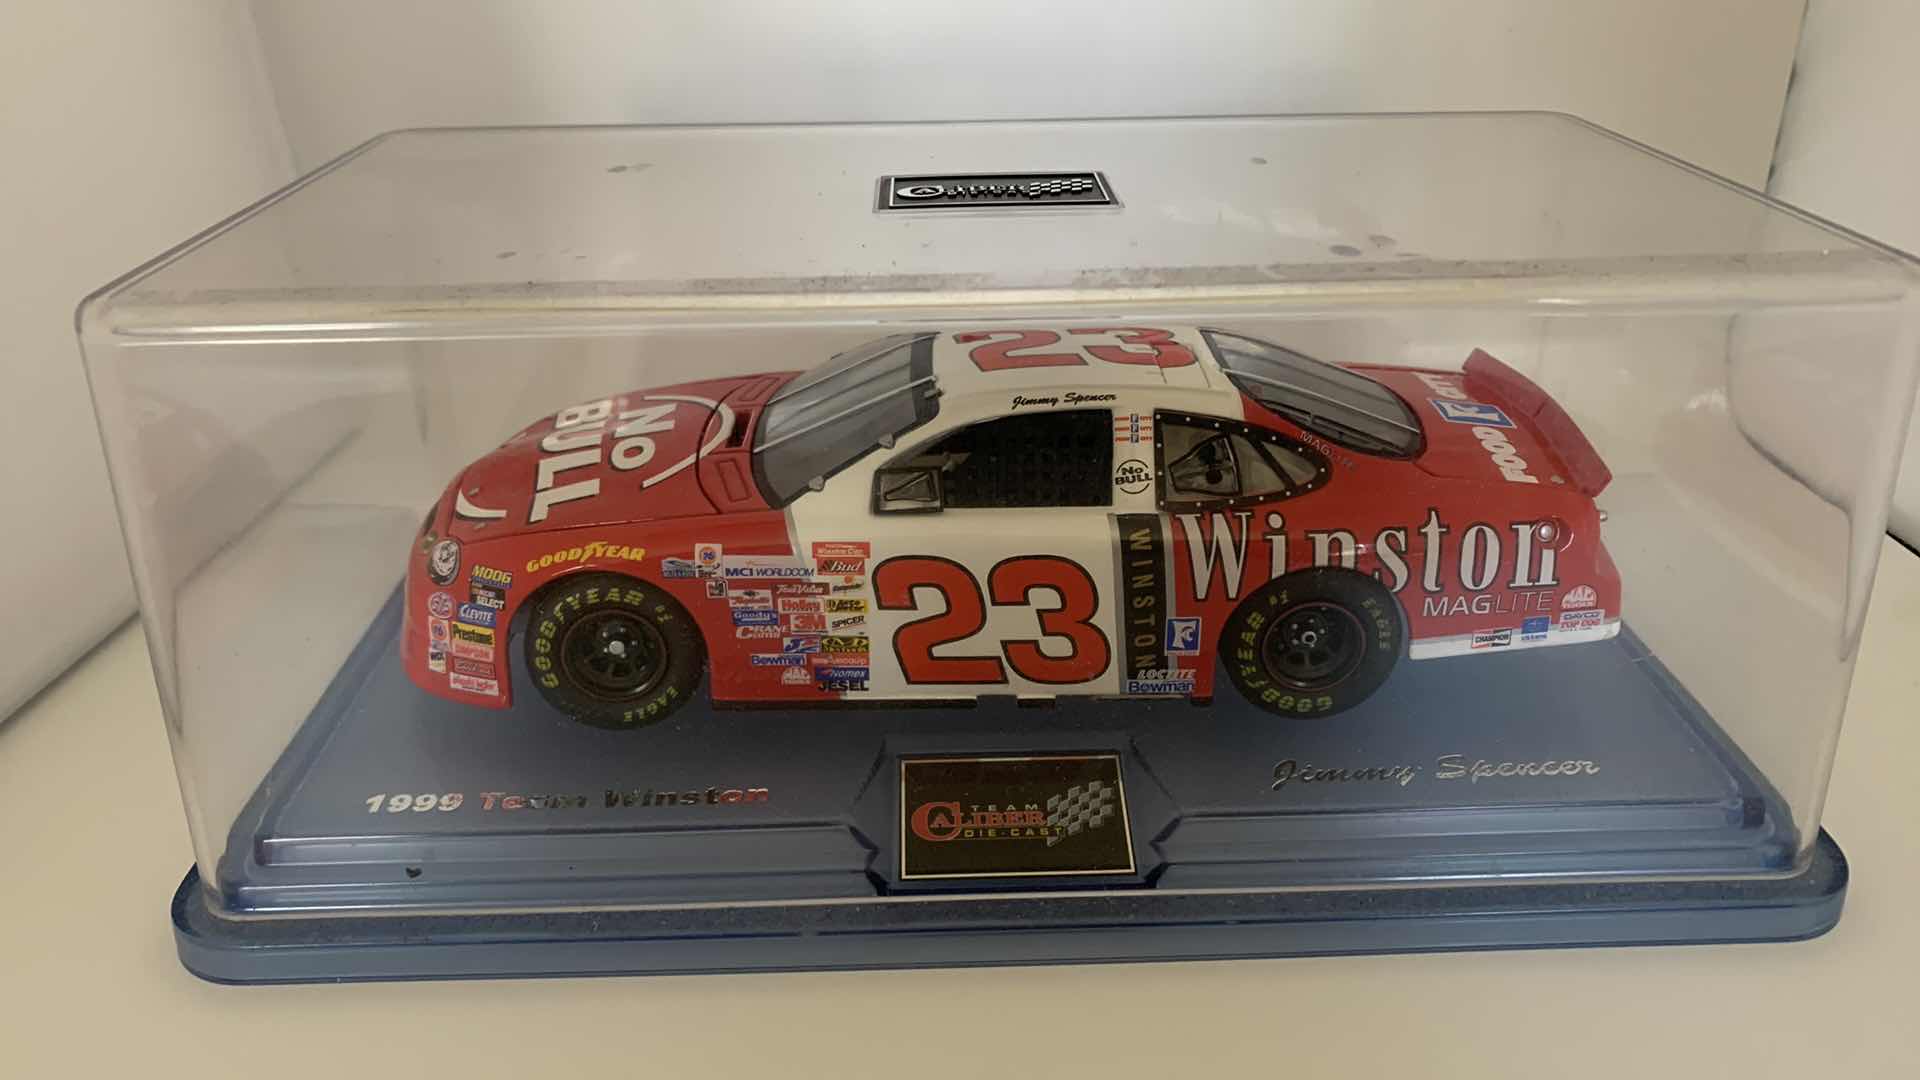 Photo 1 of 1999 TEAM WINSTON JIMMY SPENCER DIE CAST RACE CAR IN SHOW CASE.